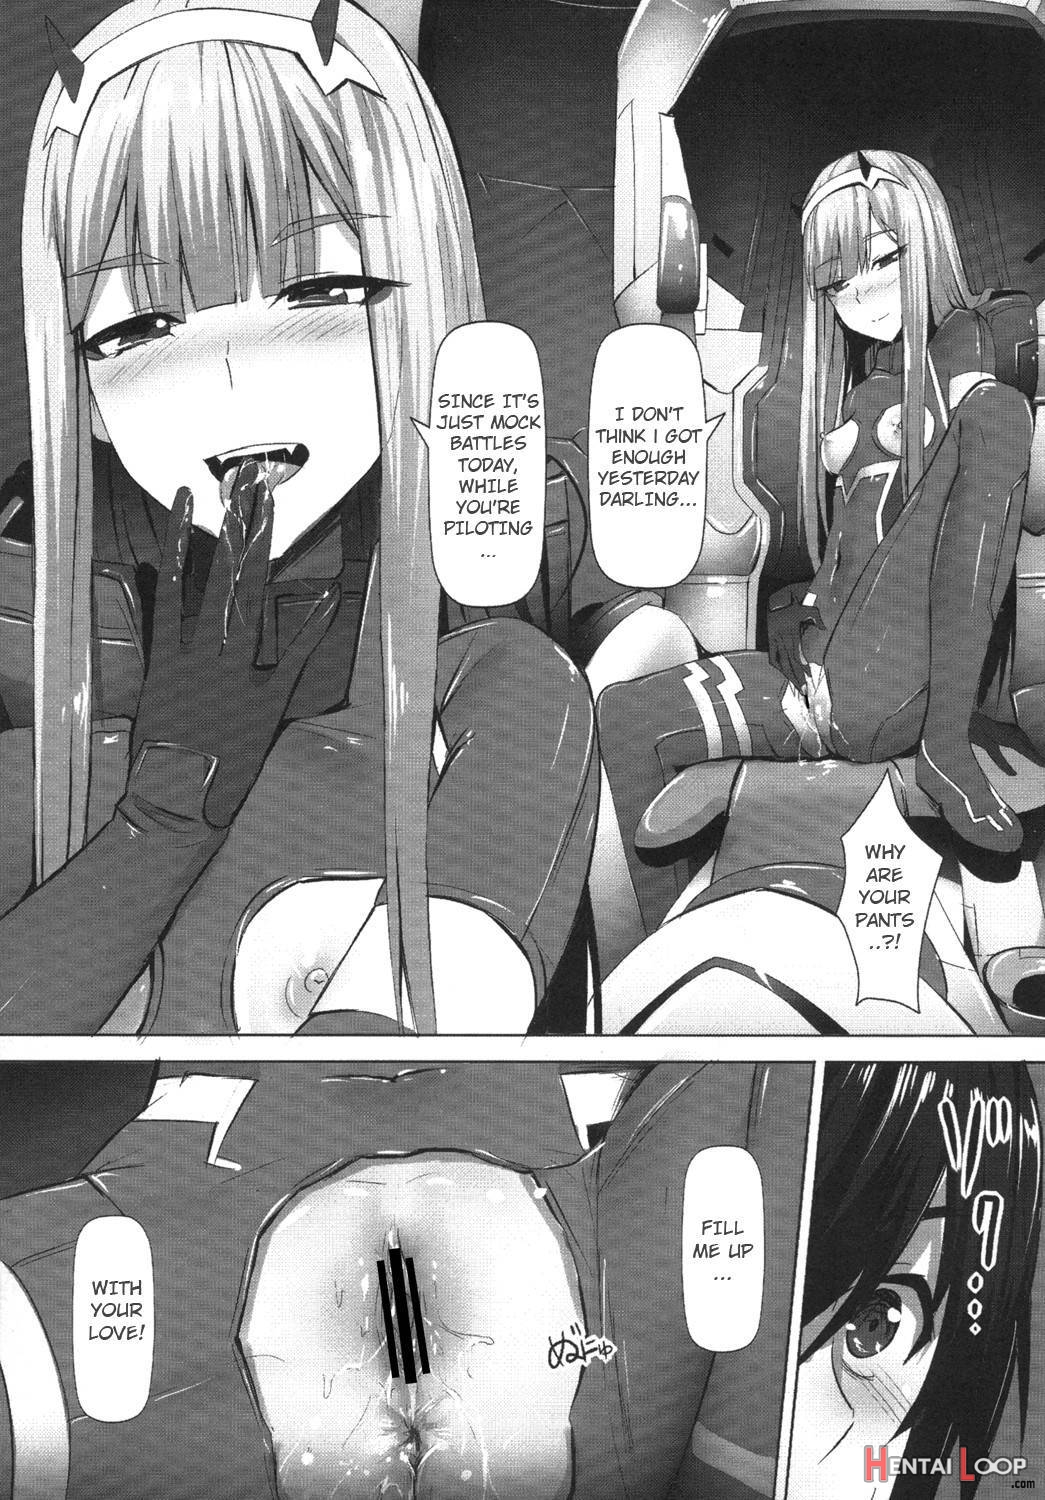 Darling Need More Sexx page 10